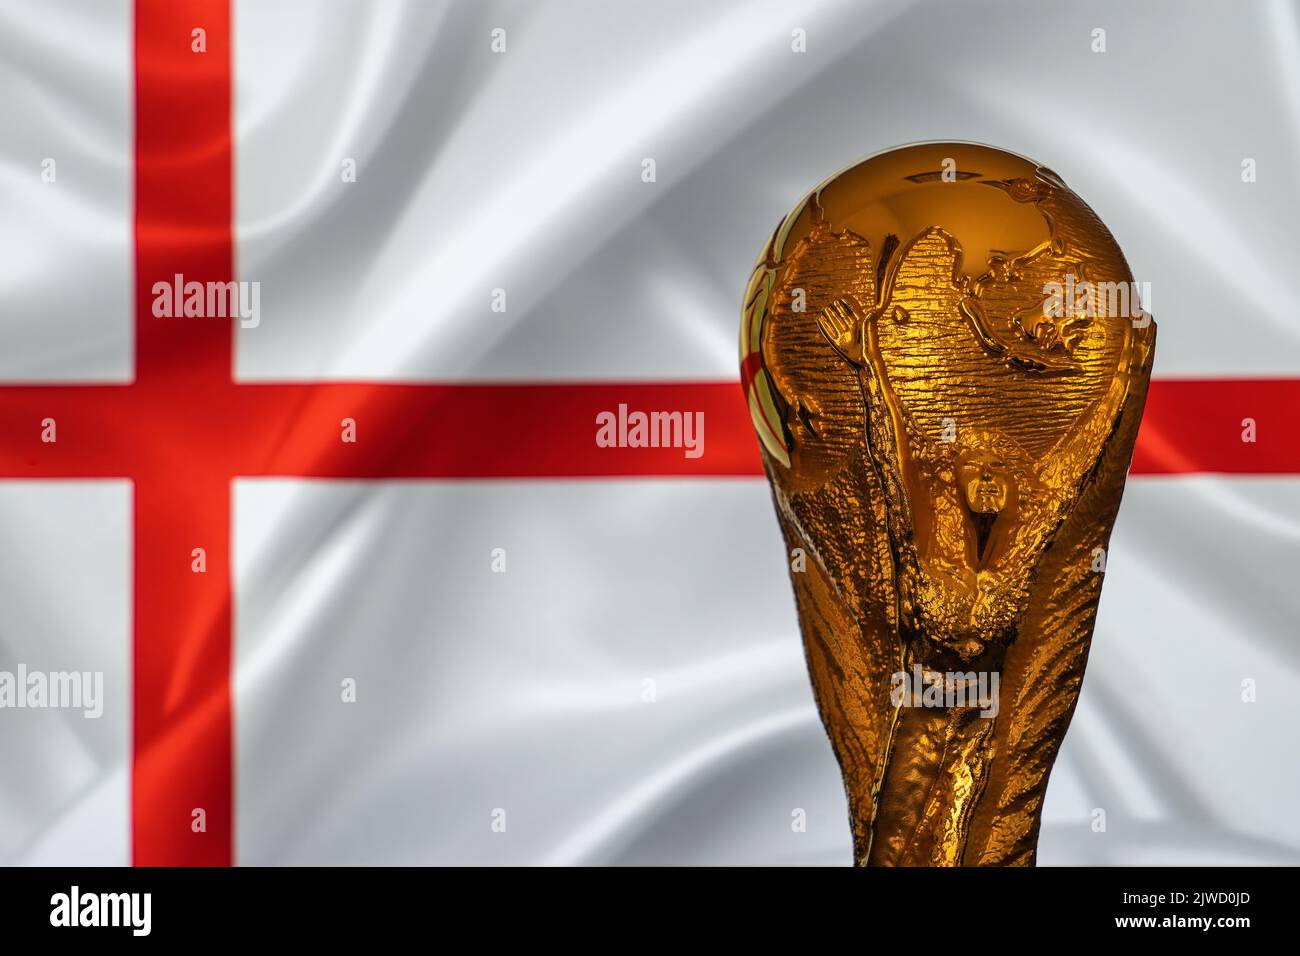 Doha, Qatar - September 4, 2022: FIFA World Cup trophy against the background of England flag. Stock Photo